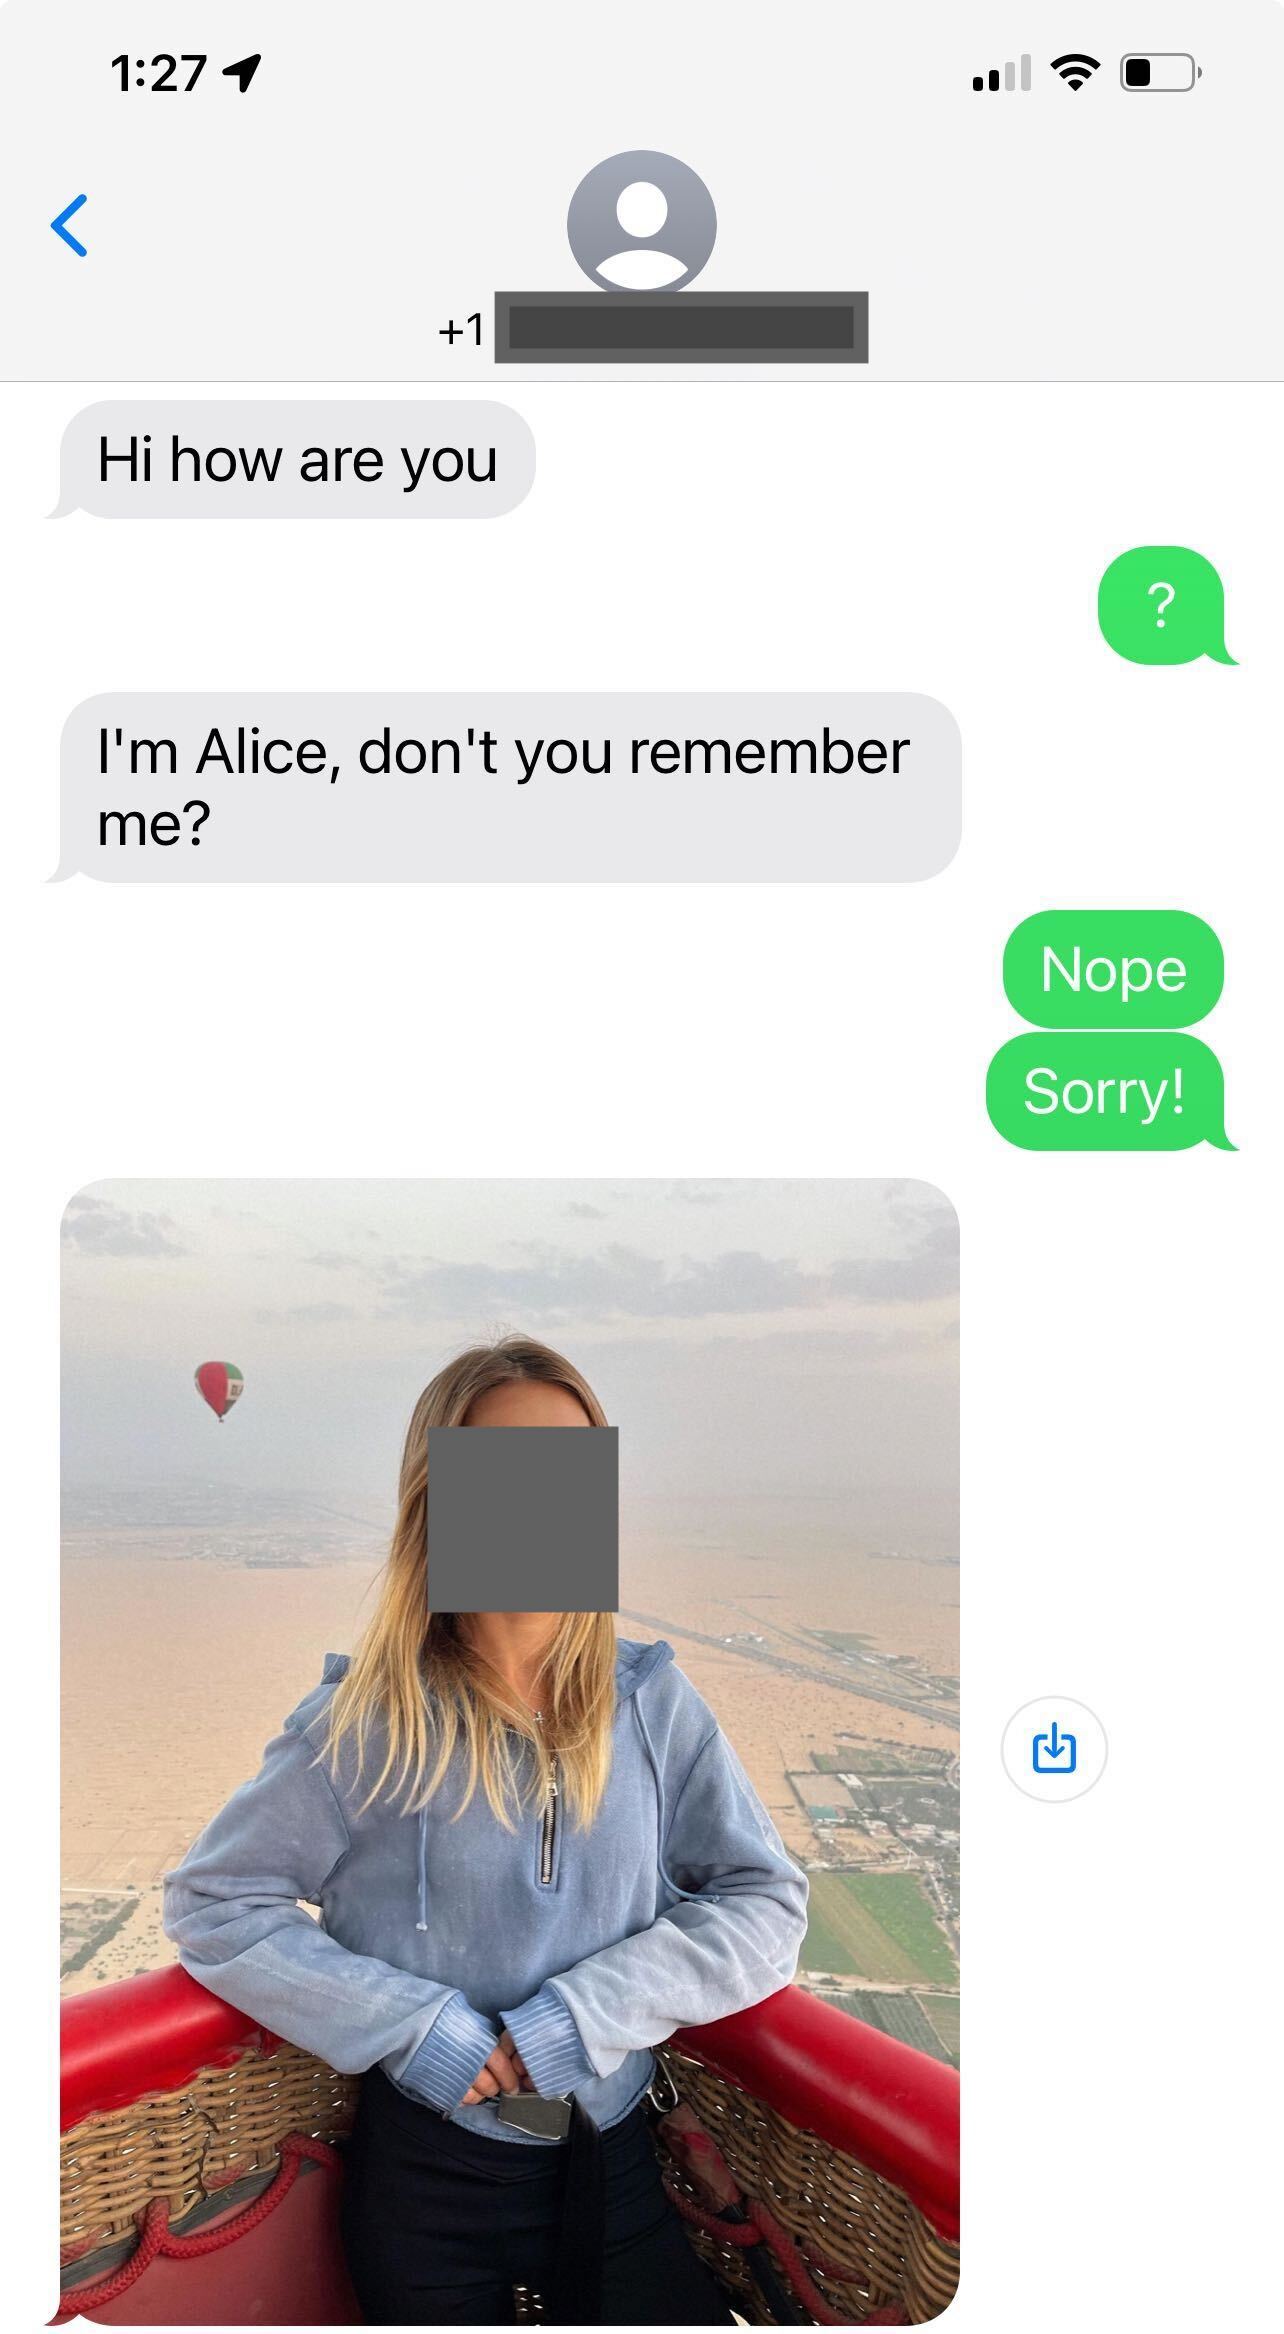 Image of a text message exchange with phone number and face of person redacted